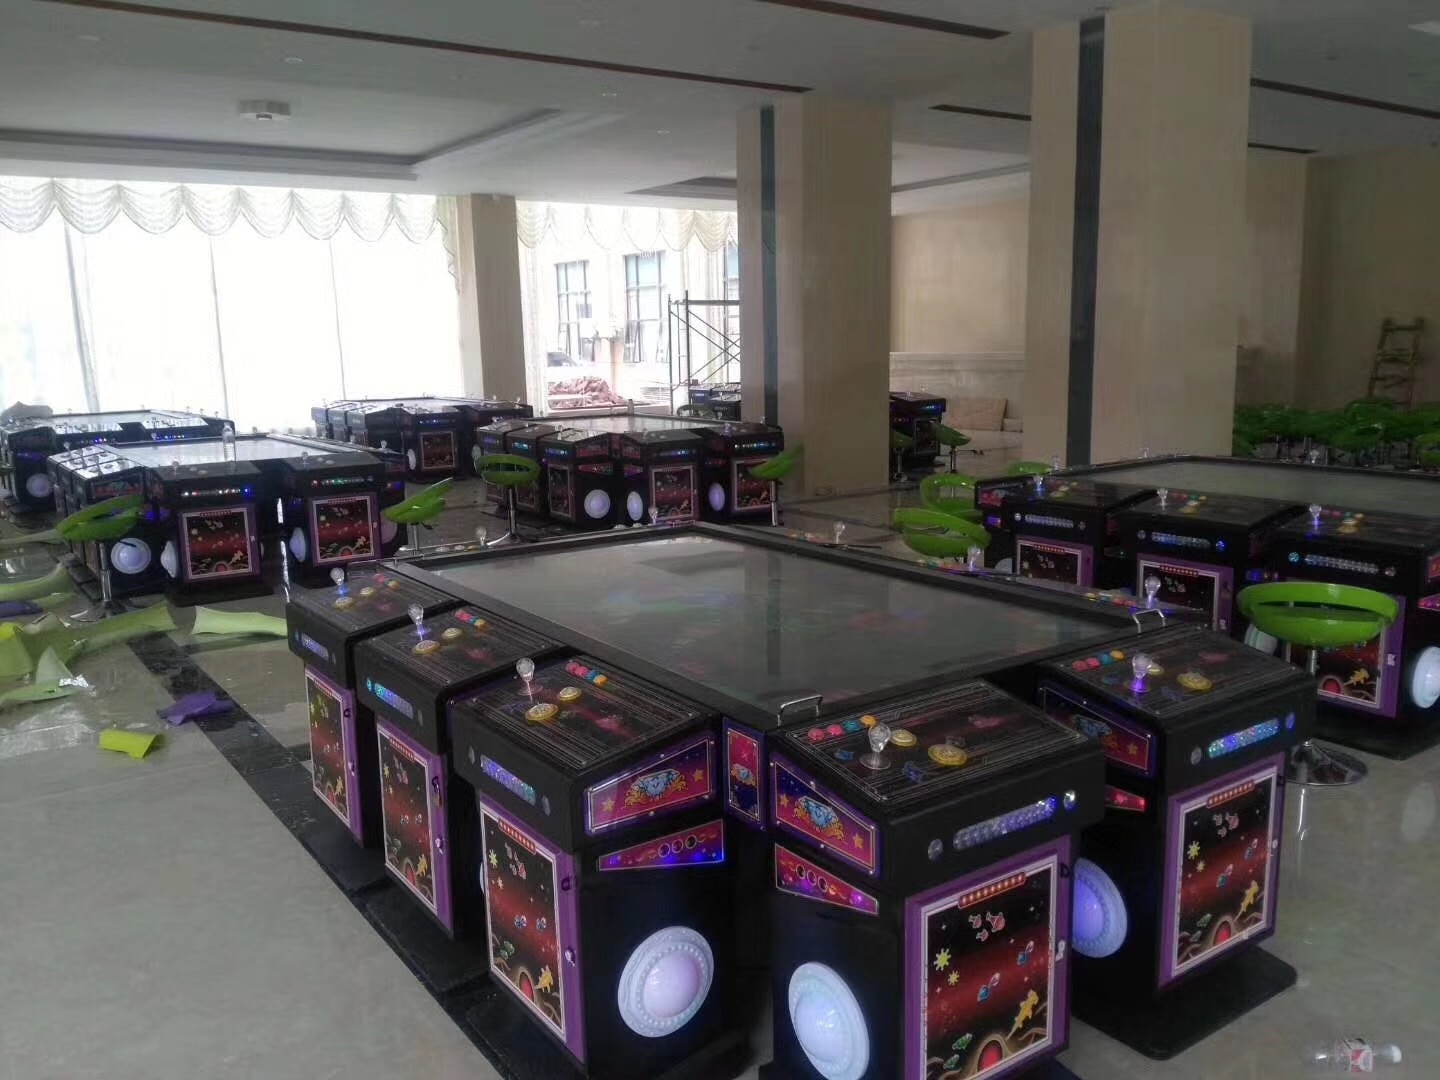 Fish Table Skill Game Board Insect Fire Ball Arcade Game Machine Video Game Software Fish Table Skill Game Board Insect Fire Ball Arcade Game Machine Video Game Software fish table skill game